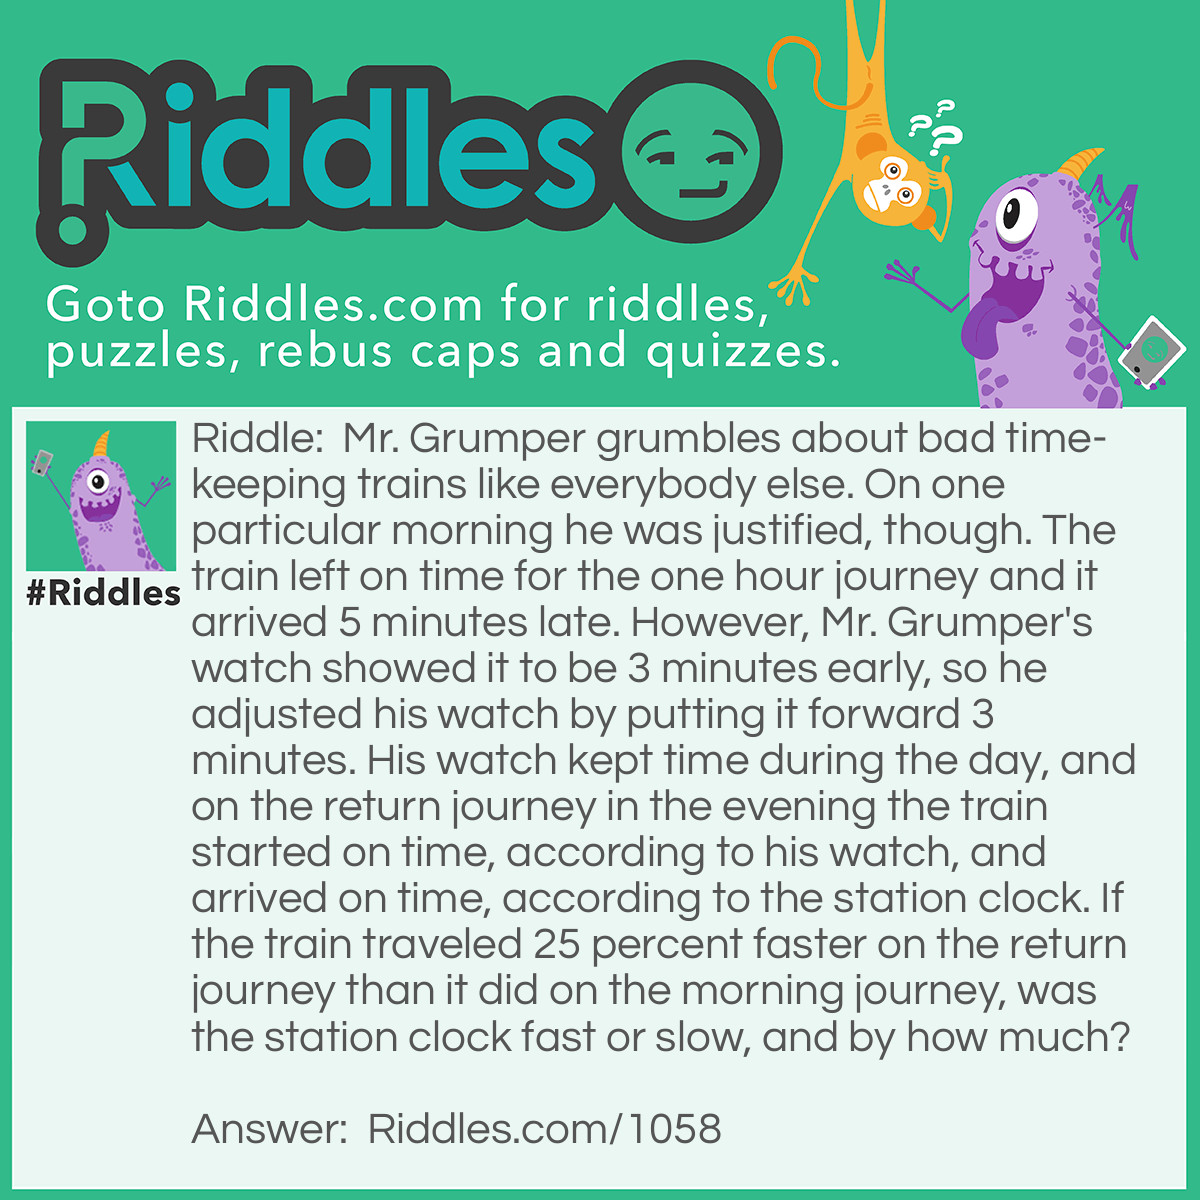 Riddle: Mr. Grumper grumbles about bad time-keeping trains like everybody else. On one particular morning he was justified, though. The train left on time for the one hour journey and it arrived 5 minutes late. However, Mr. Grumper's watch showed it to be 3 minutes early, so he adjusted his watch by putting it forward 3 minutes. His watch kept time during the day, and on the return journey in the evening the train started on time, according to his watch, and arrived on time, according to the station clock. If the train traveled 25 percent faster on the return journey than it did on the morning journey, was the station clock fast or slow, and by how much? Answer: The station clock is 3 minutes fast. The morning journey took 65 minutes, and the evening journey therefore took 52 minutes, and the train arrived 57 minutes after it should have left, that is, 3 minutes early.